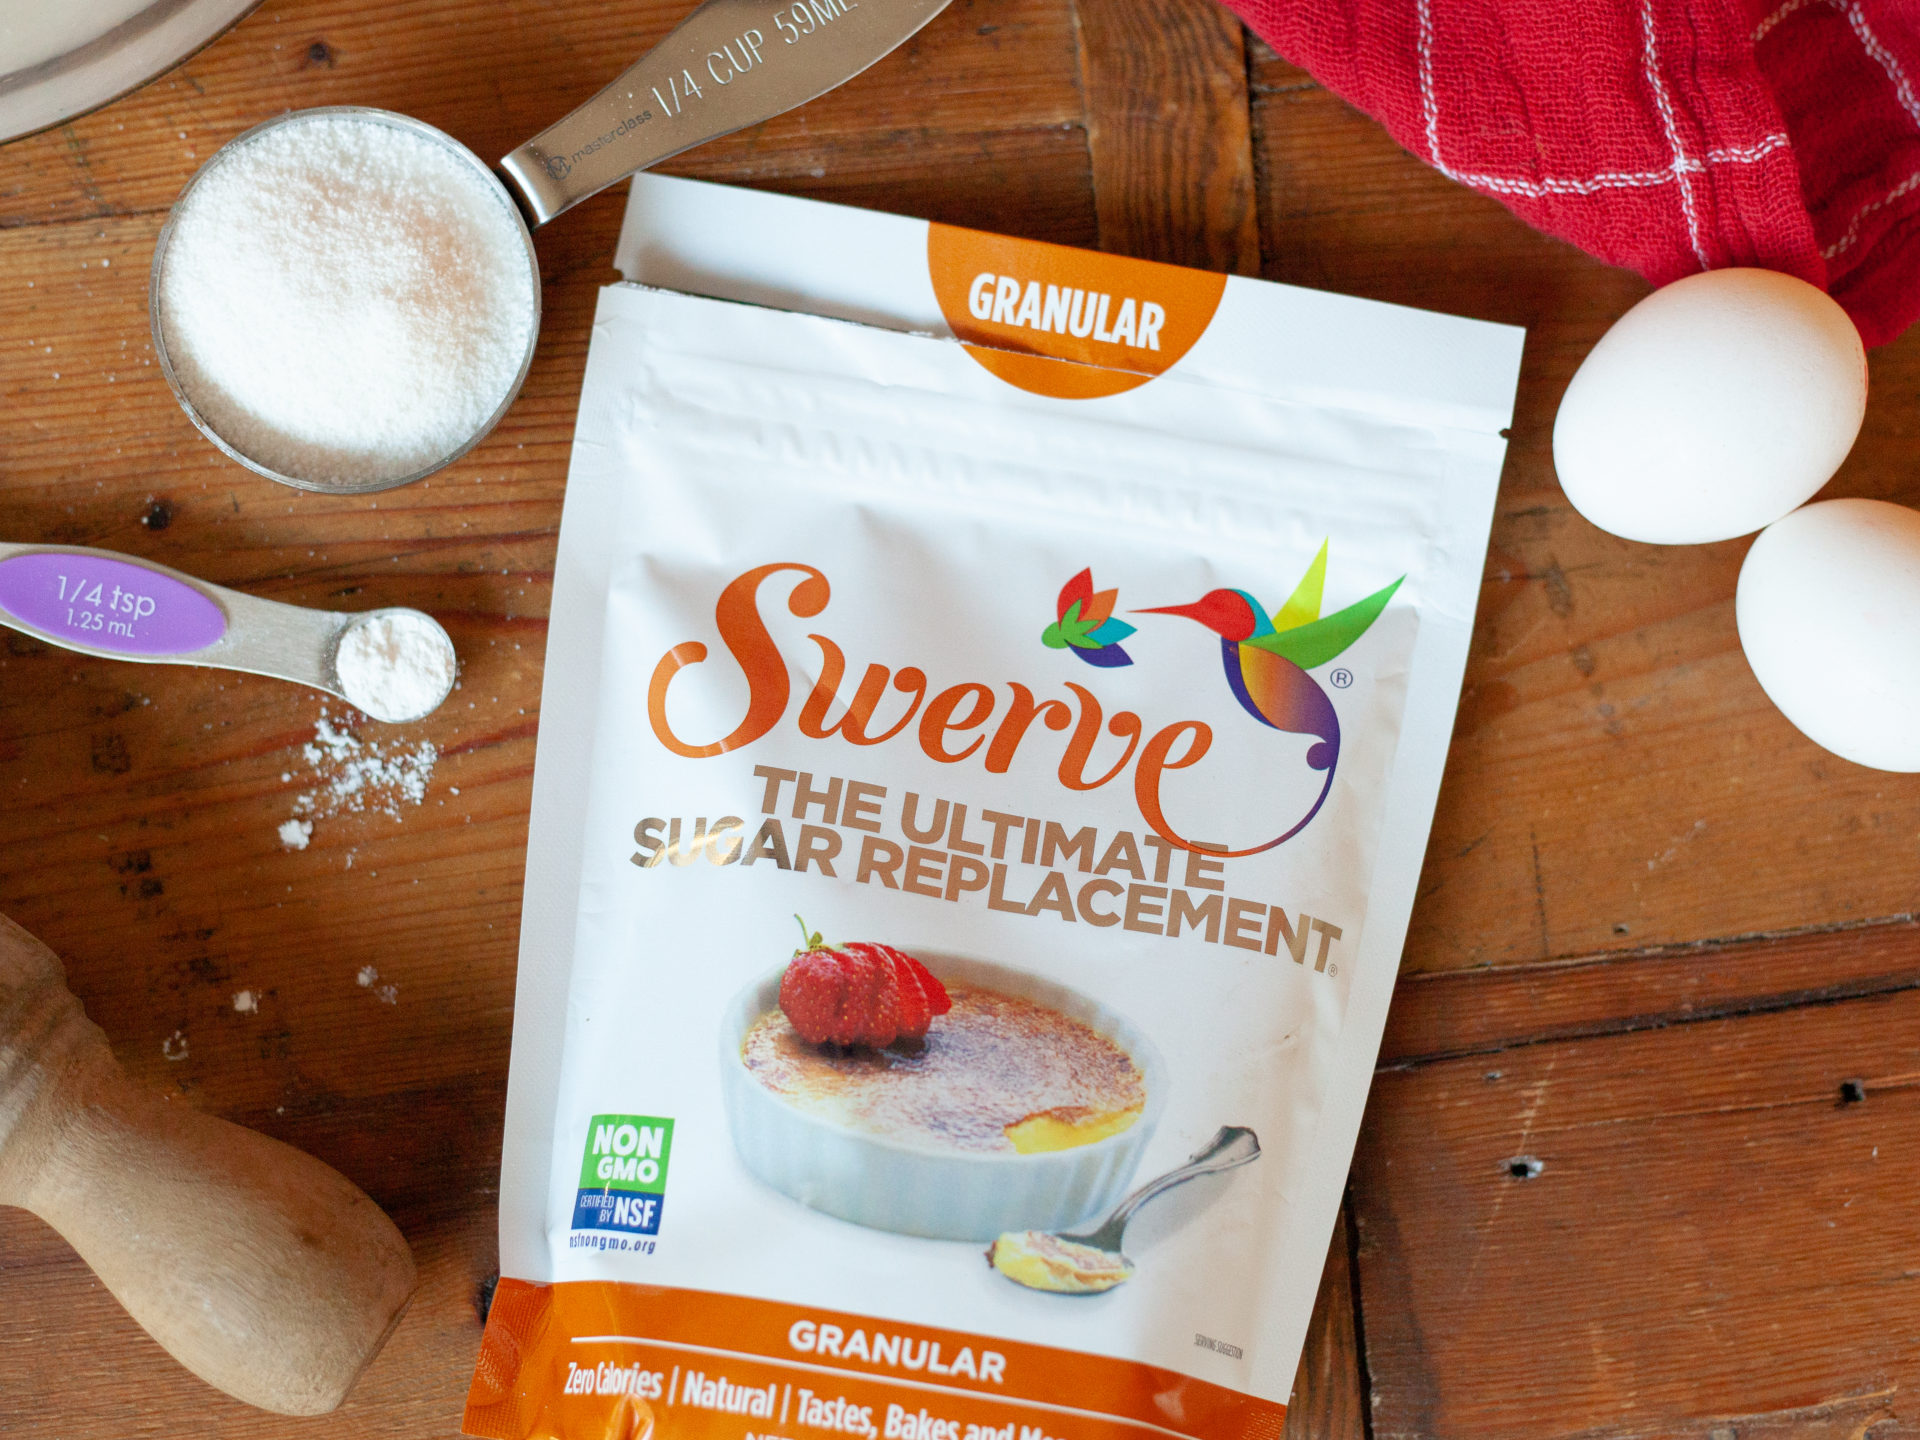 Swerve Sweeteners As Low As $4.74 At Kroger – Almost Half Price!